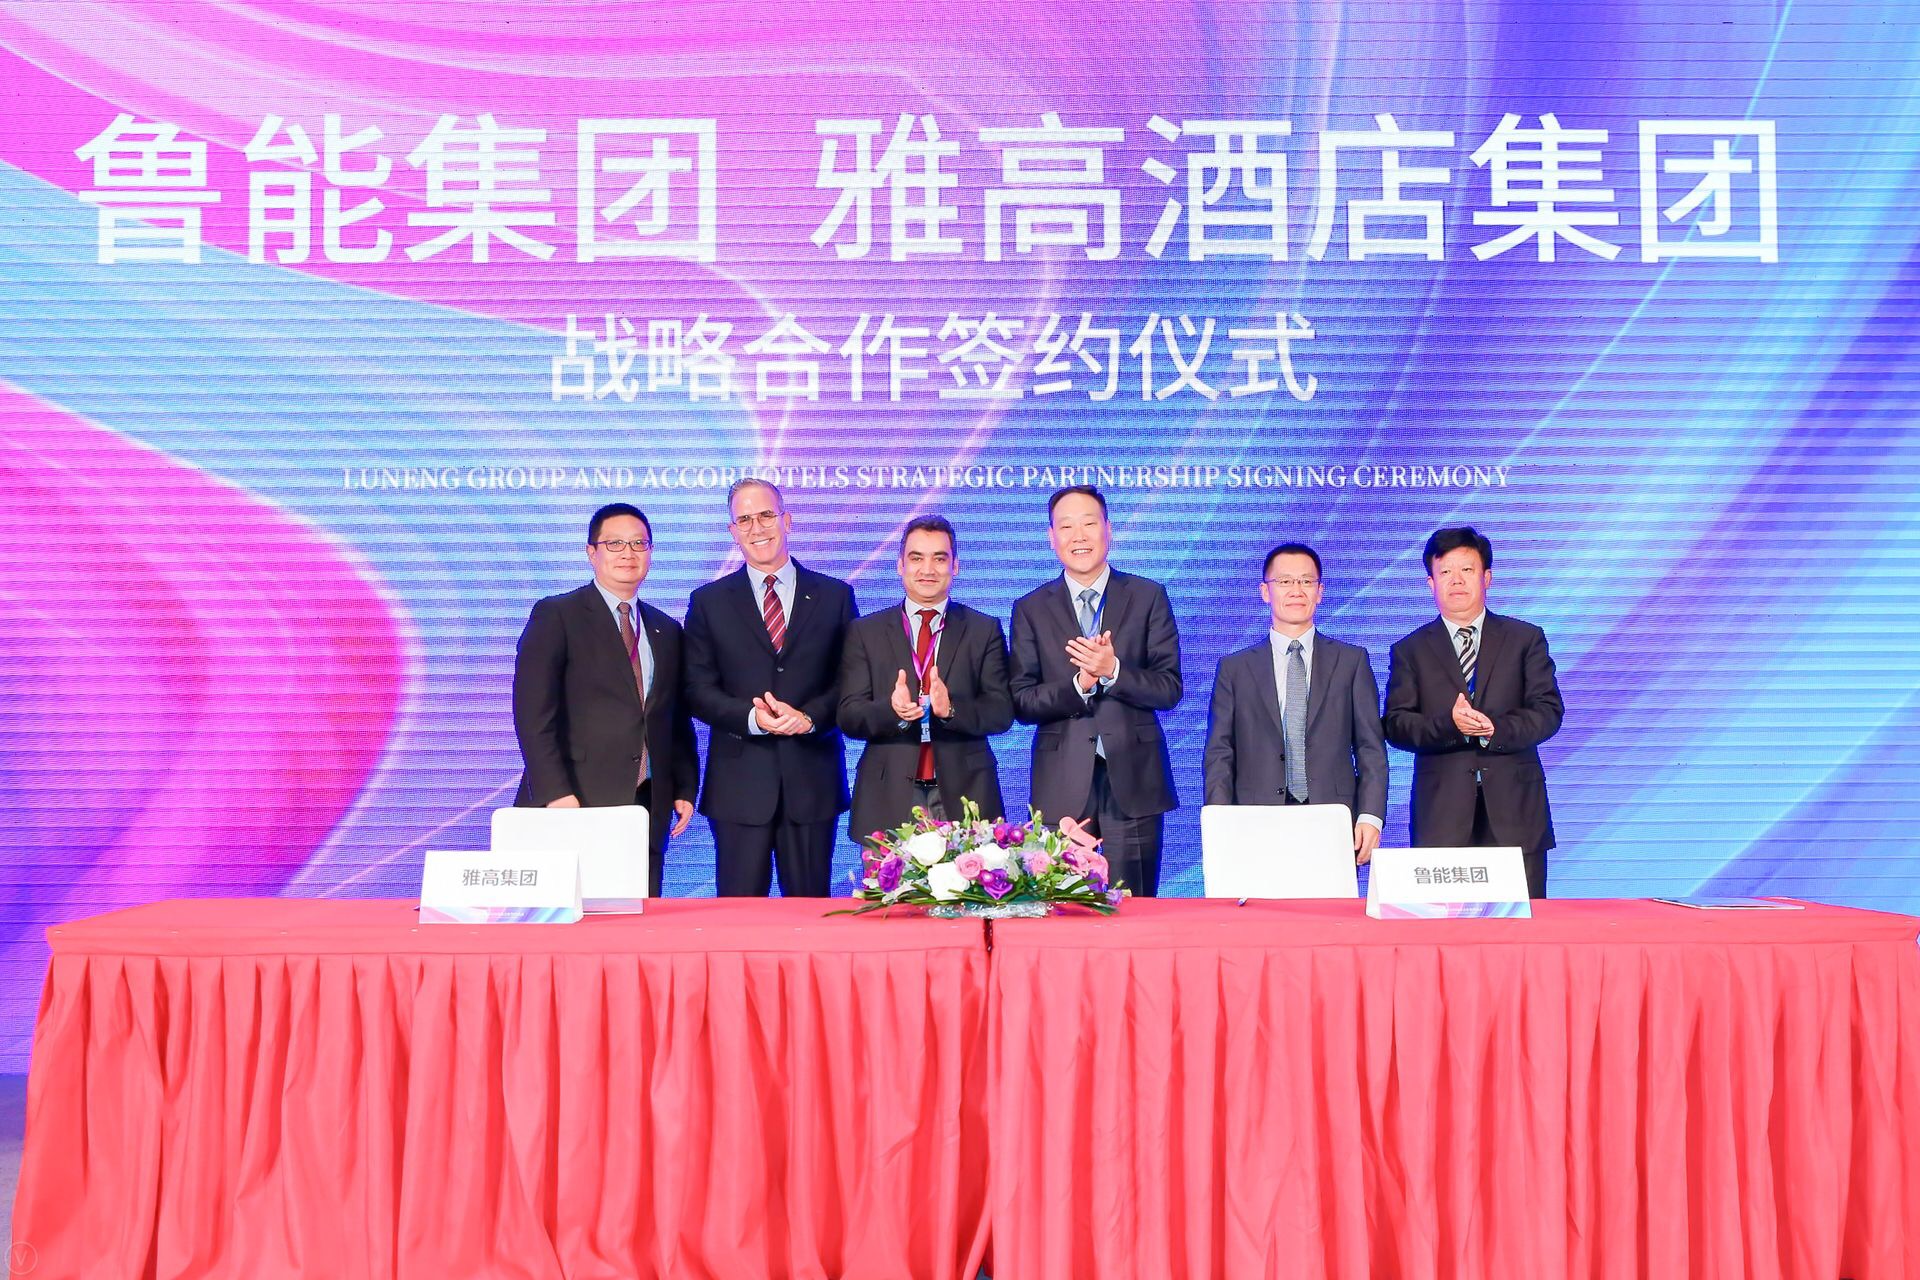 AccorHotels teams up with Luneng Group for unprecedented strategic alliance